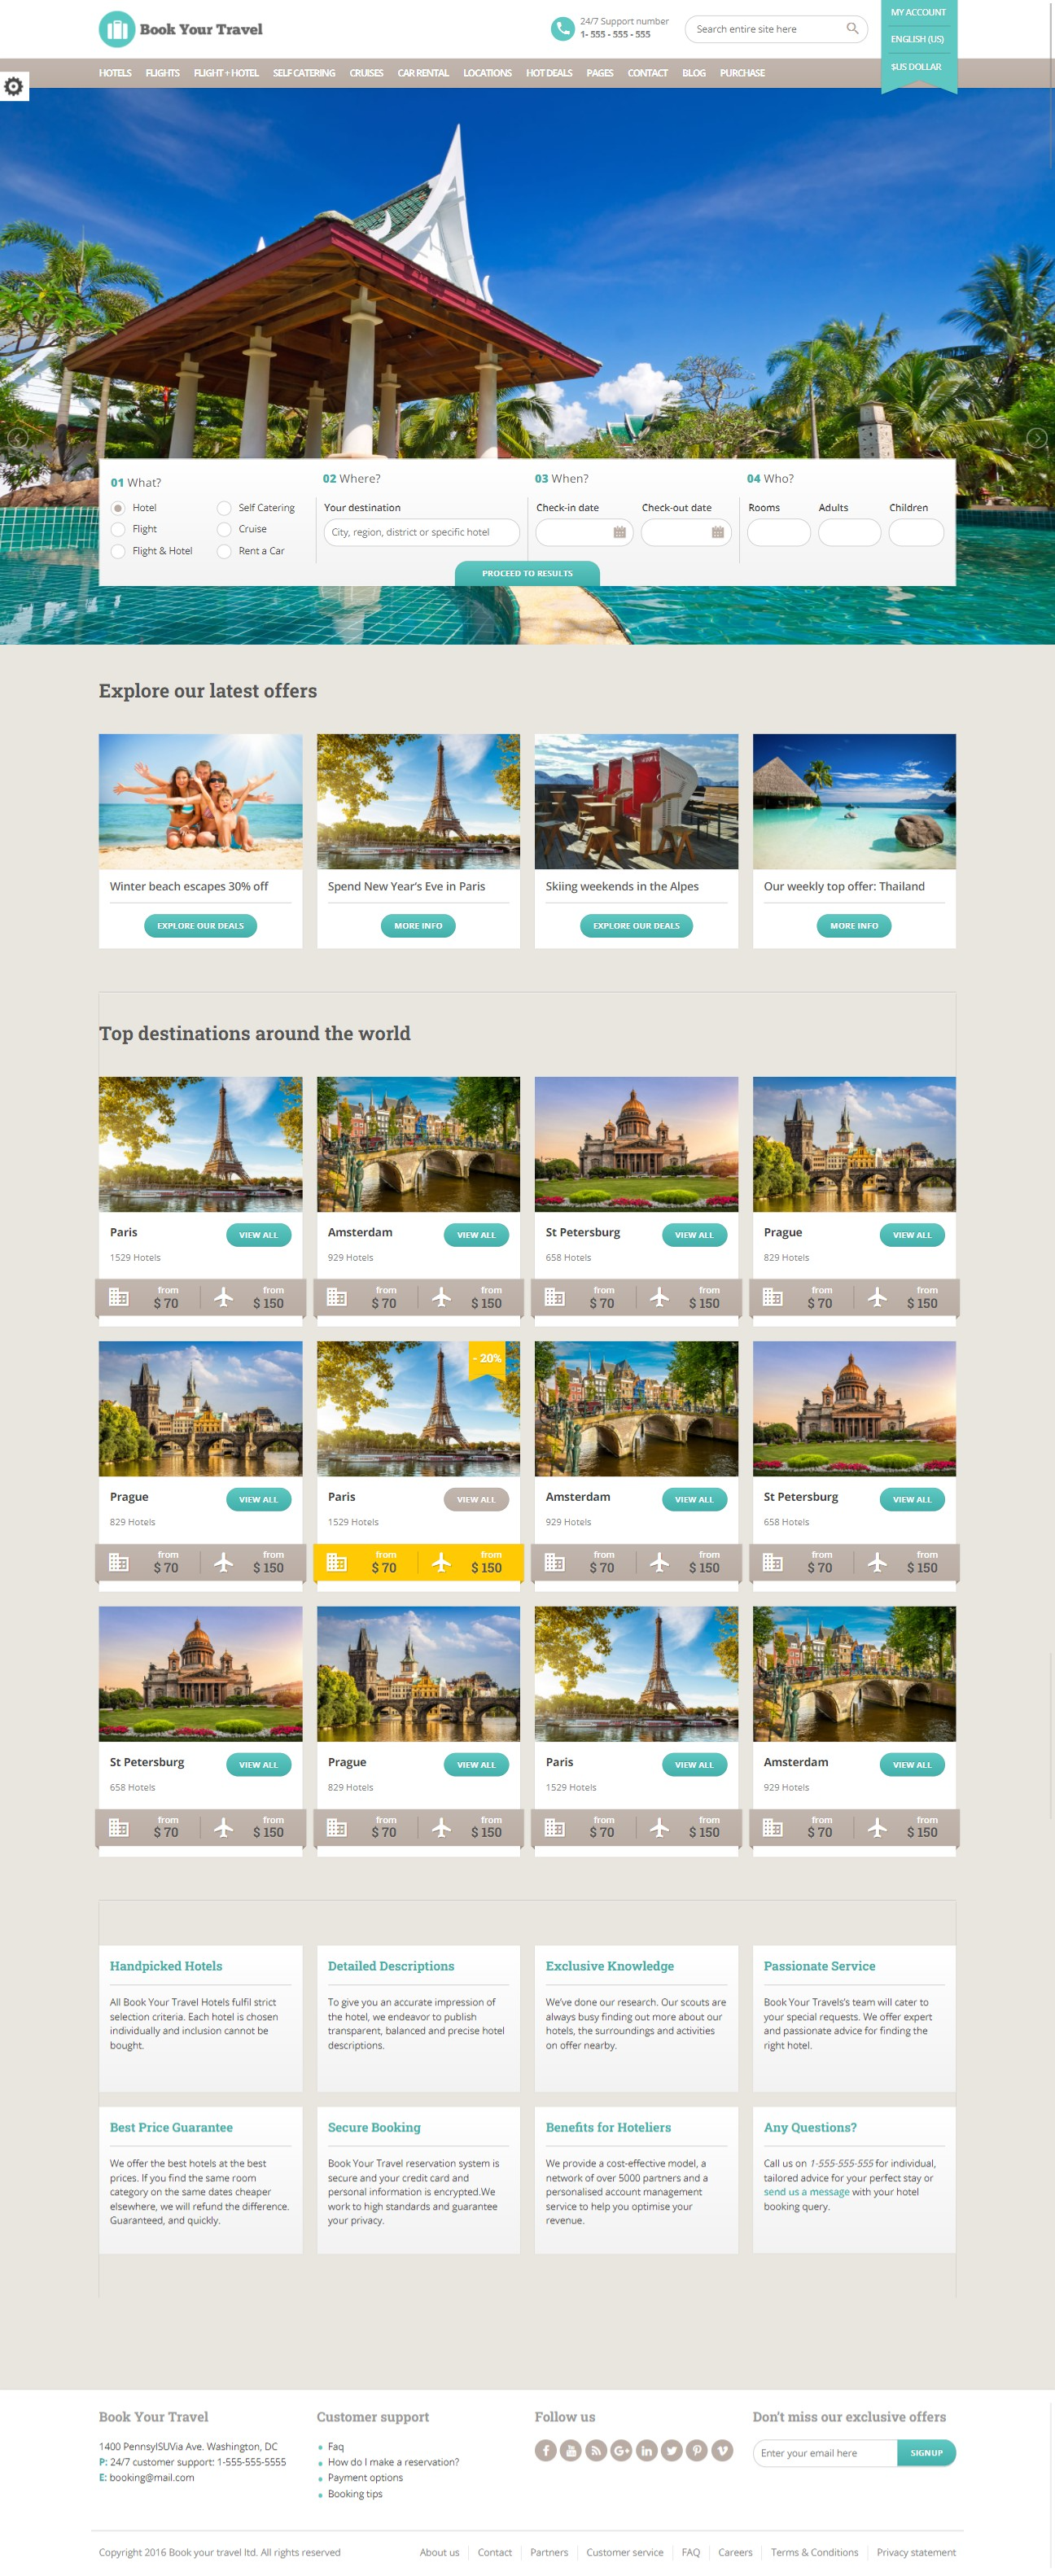 Mẫu giao diện website Du lịch Book Your Travel